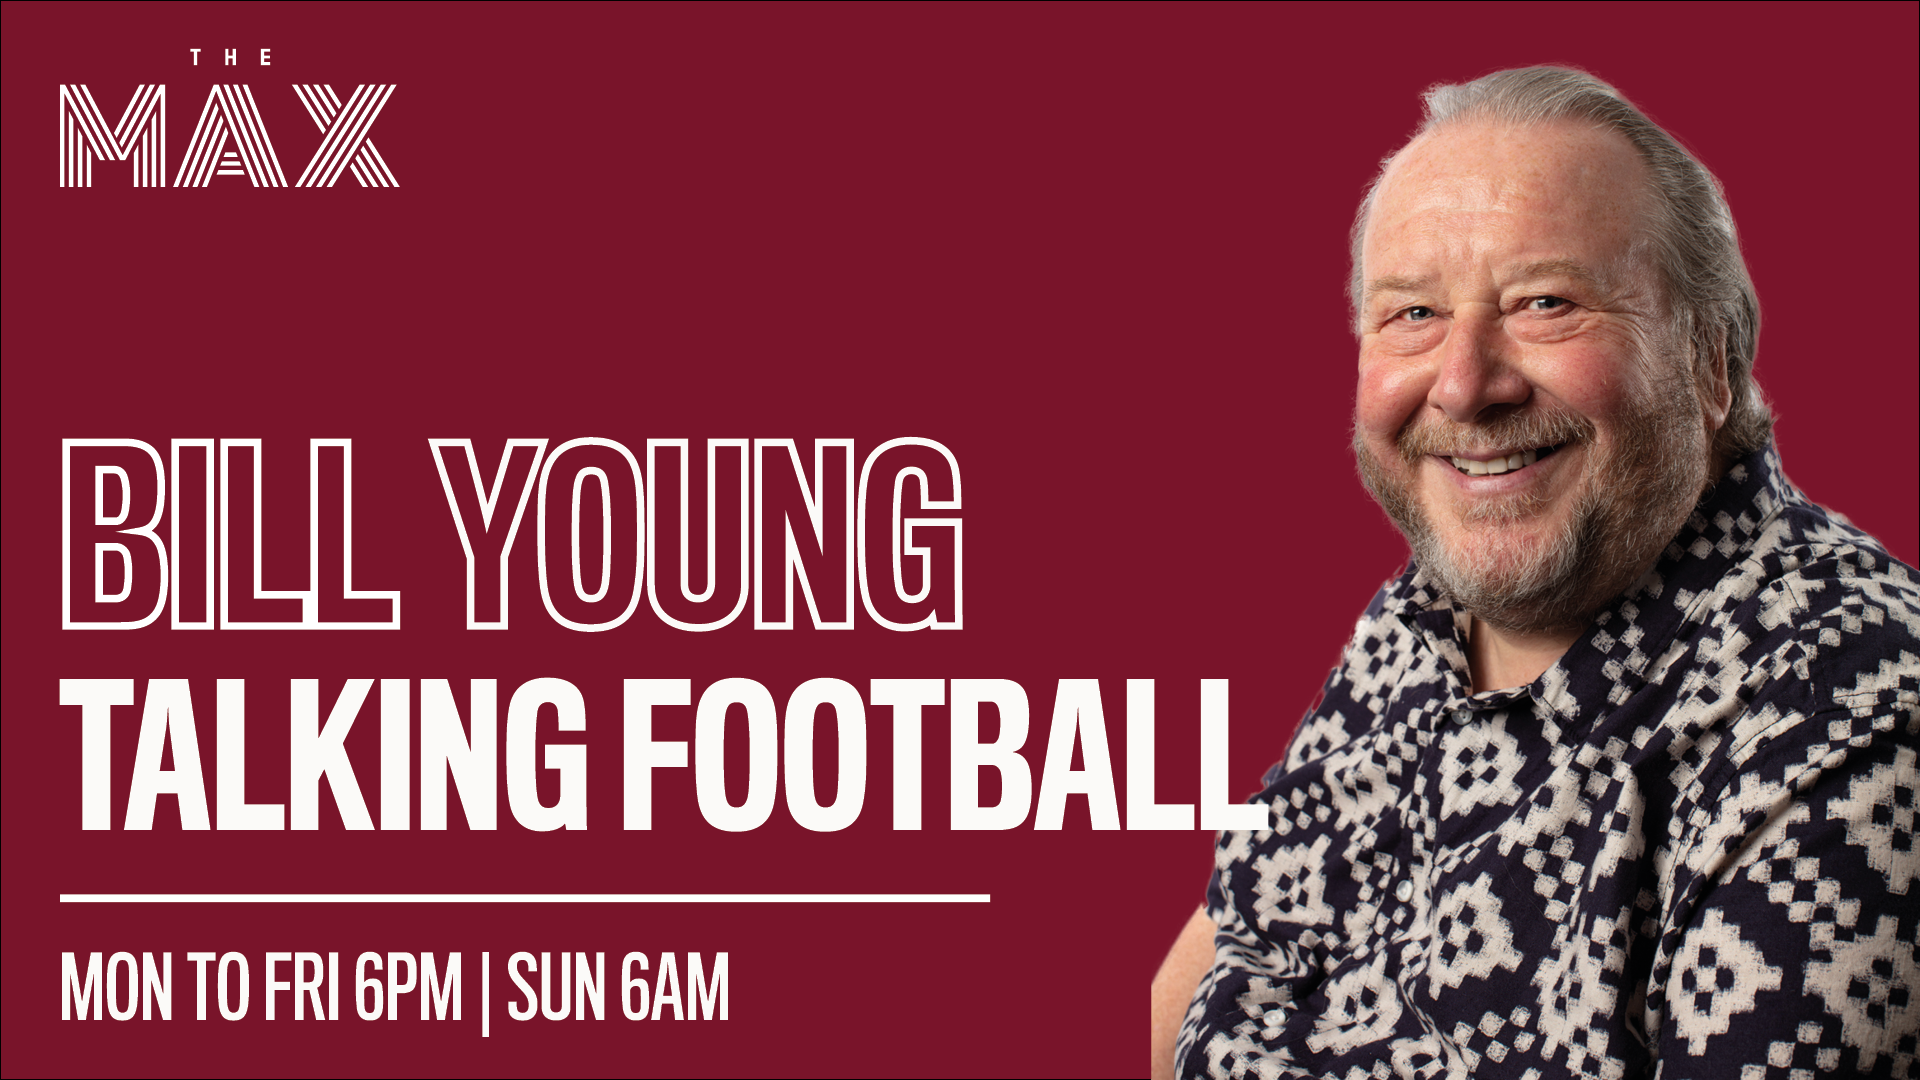 Talking Football with Bill Young - Wednesday 21st April